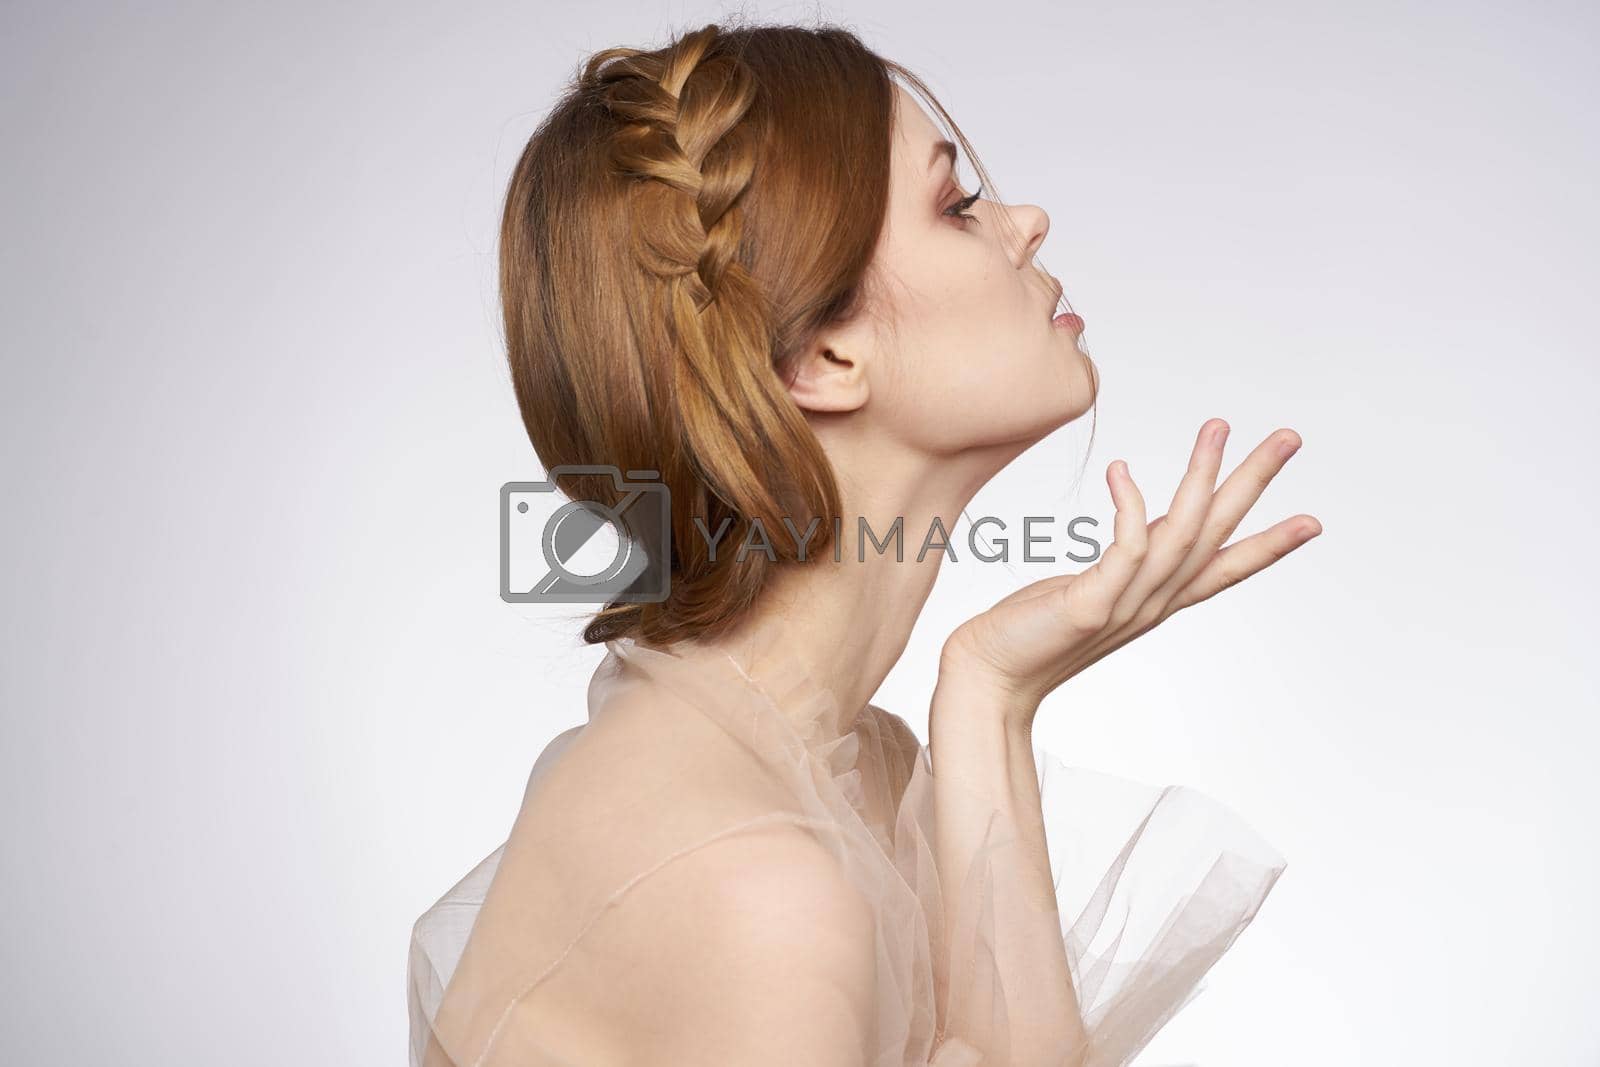 cheerful woman gesture hands cosmetics fashion hairstyle posing model studio. High quality photo